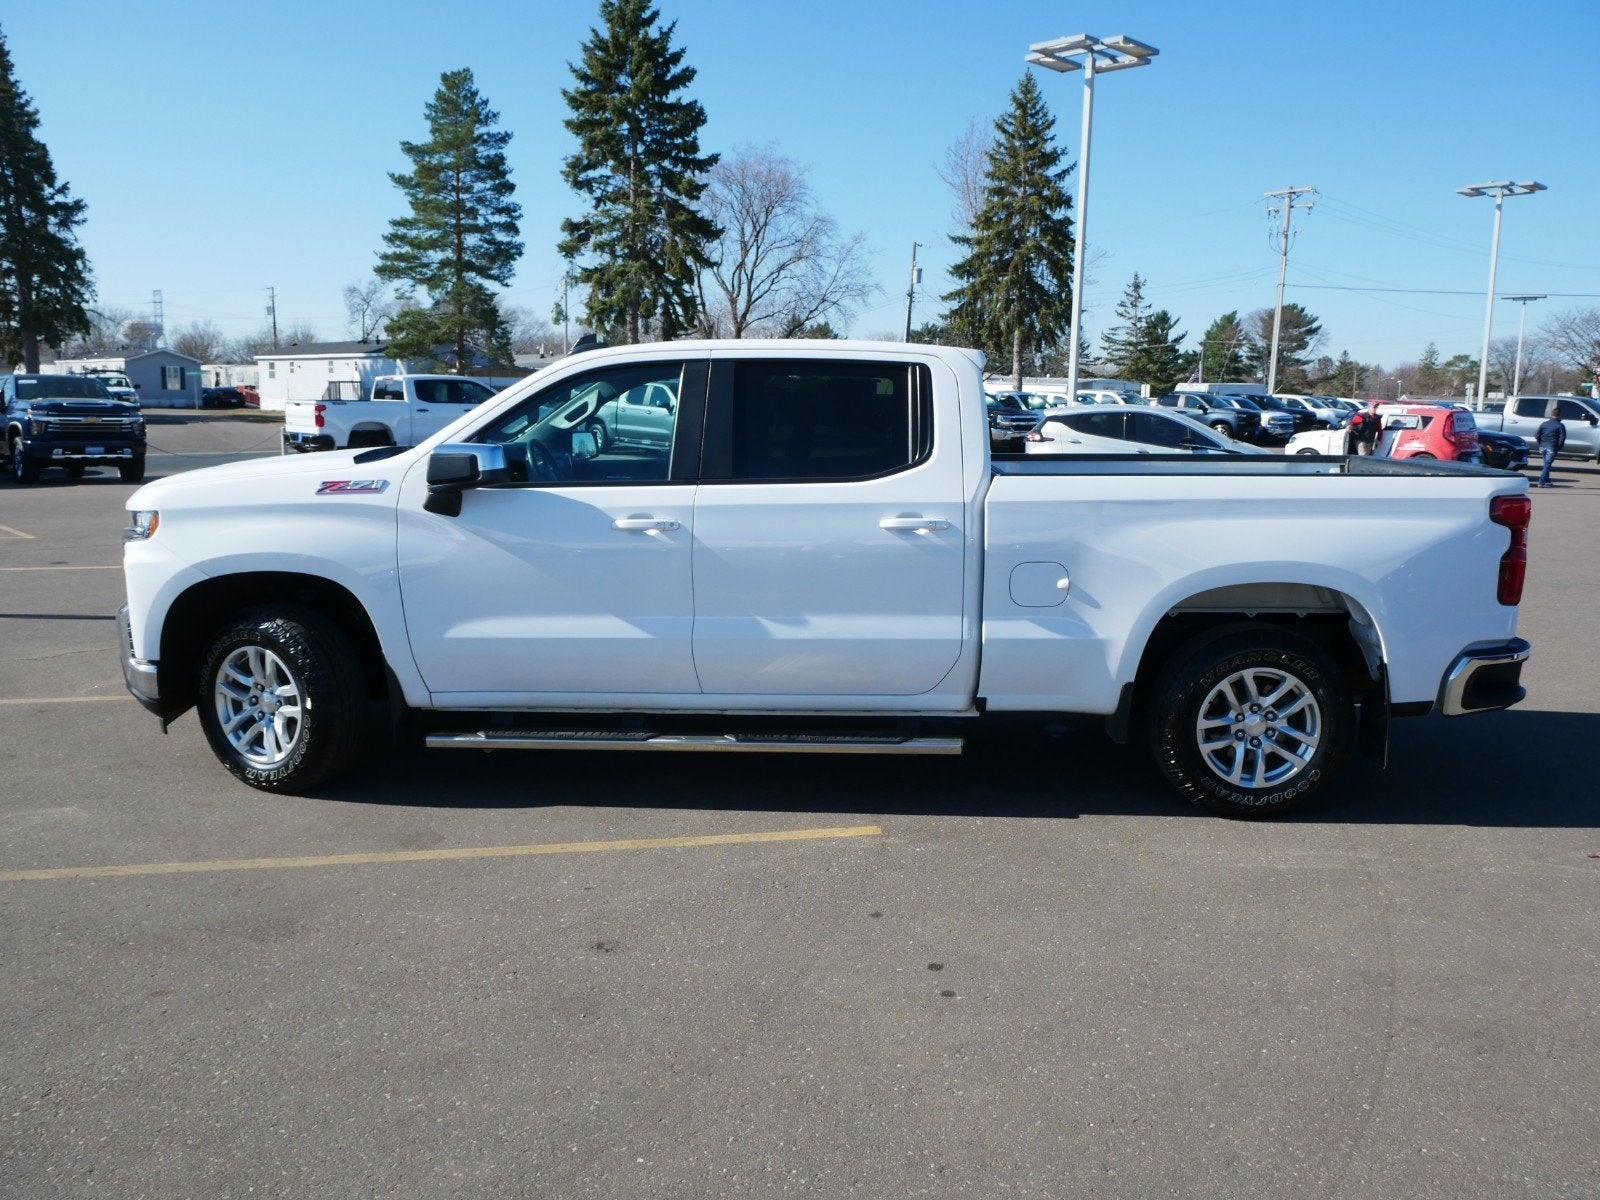 Used 2019 Chevrolet Silverado 1500 LT with VIN 3GCUYDED1KG210358 for sale in Fridley, Minnesota